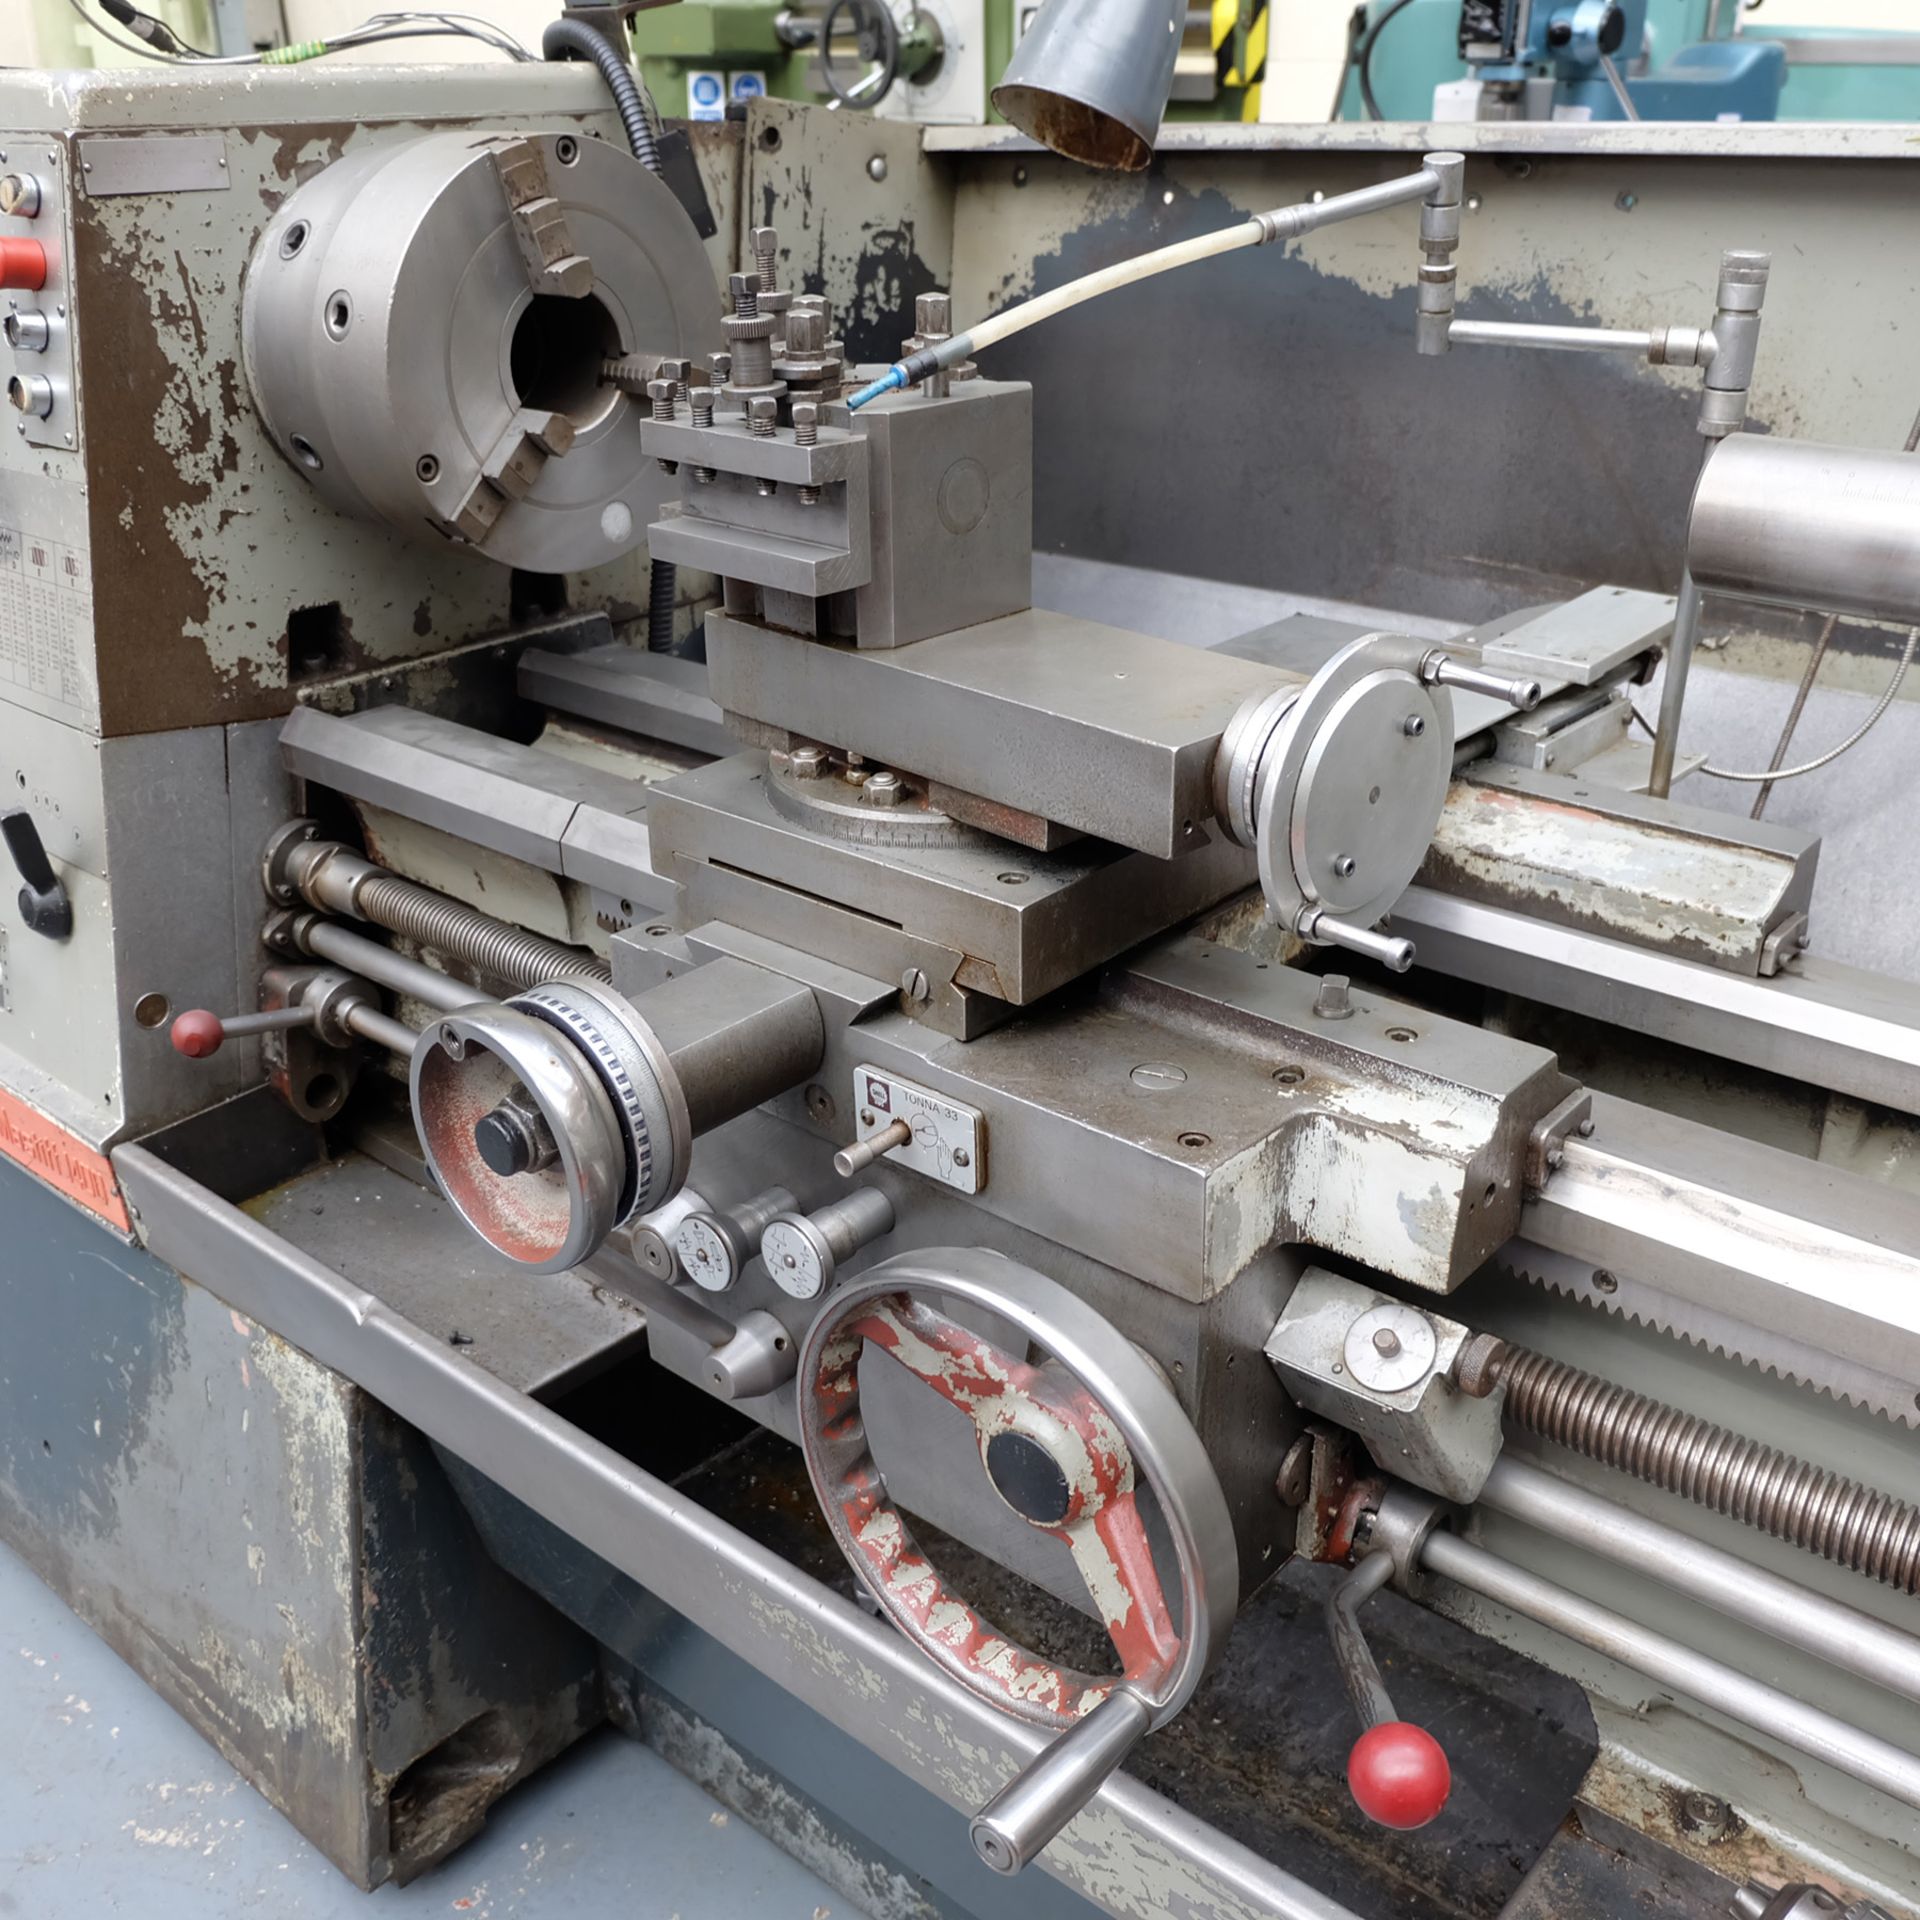 Colchester Mastiff 1400 Gap Bed Centre Lathe. 21" Swing Over Bed. 40" Distance Between Centres. - Image 6 of 7